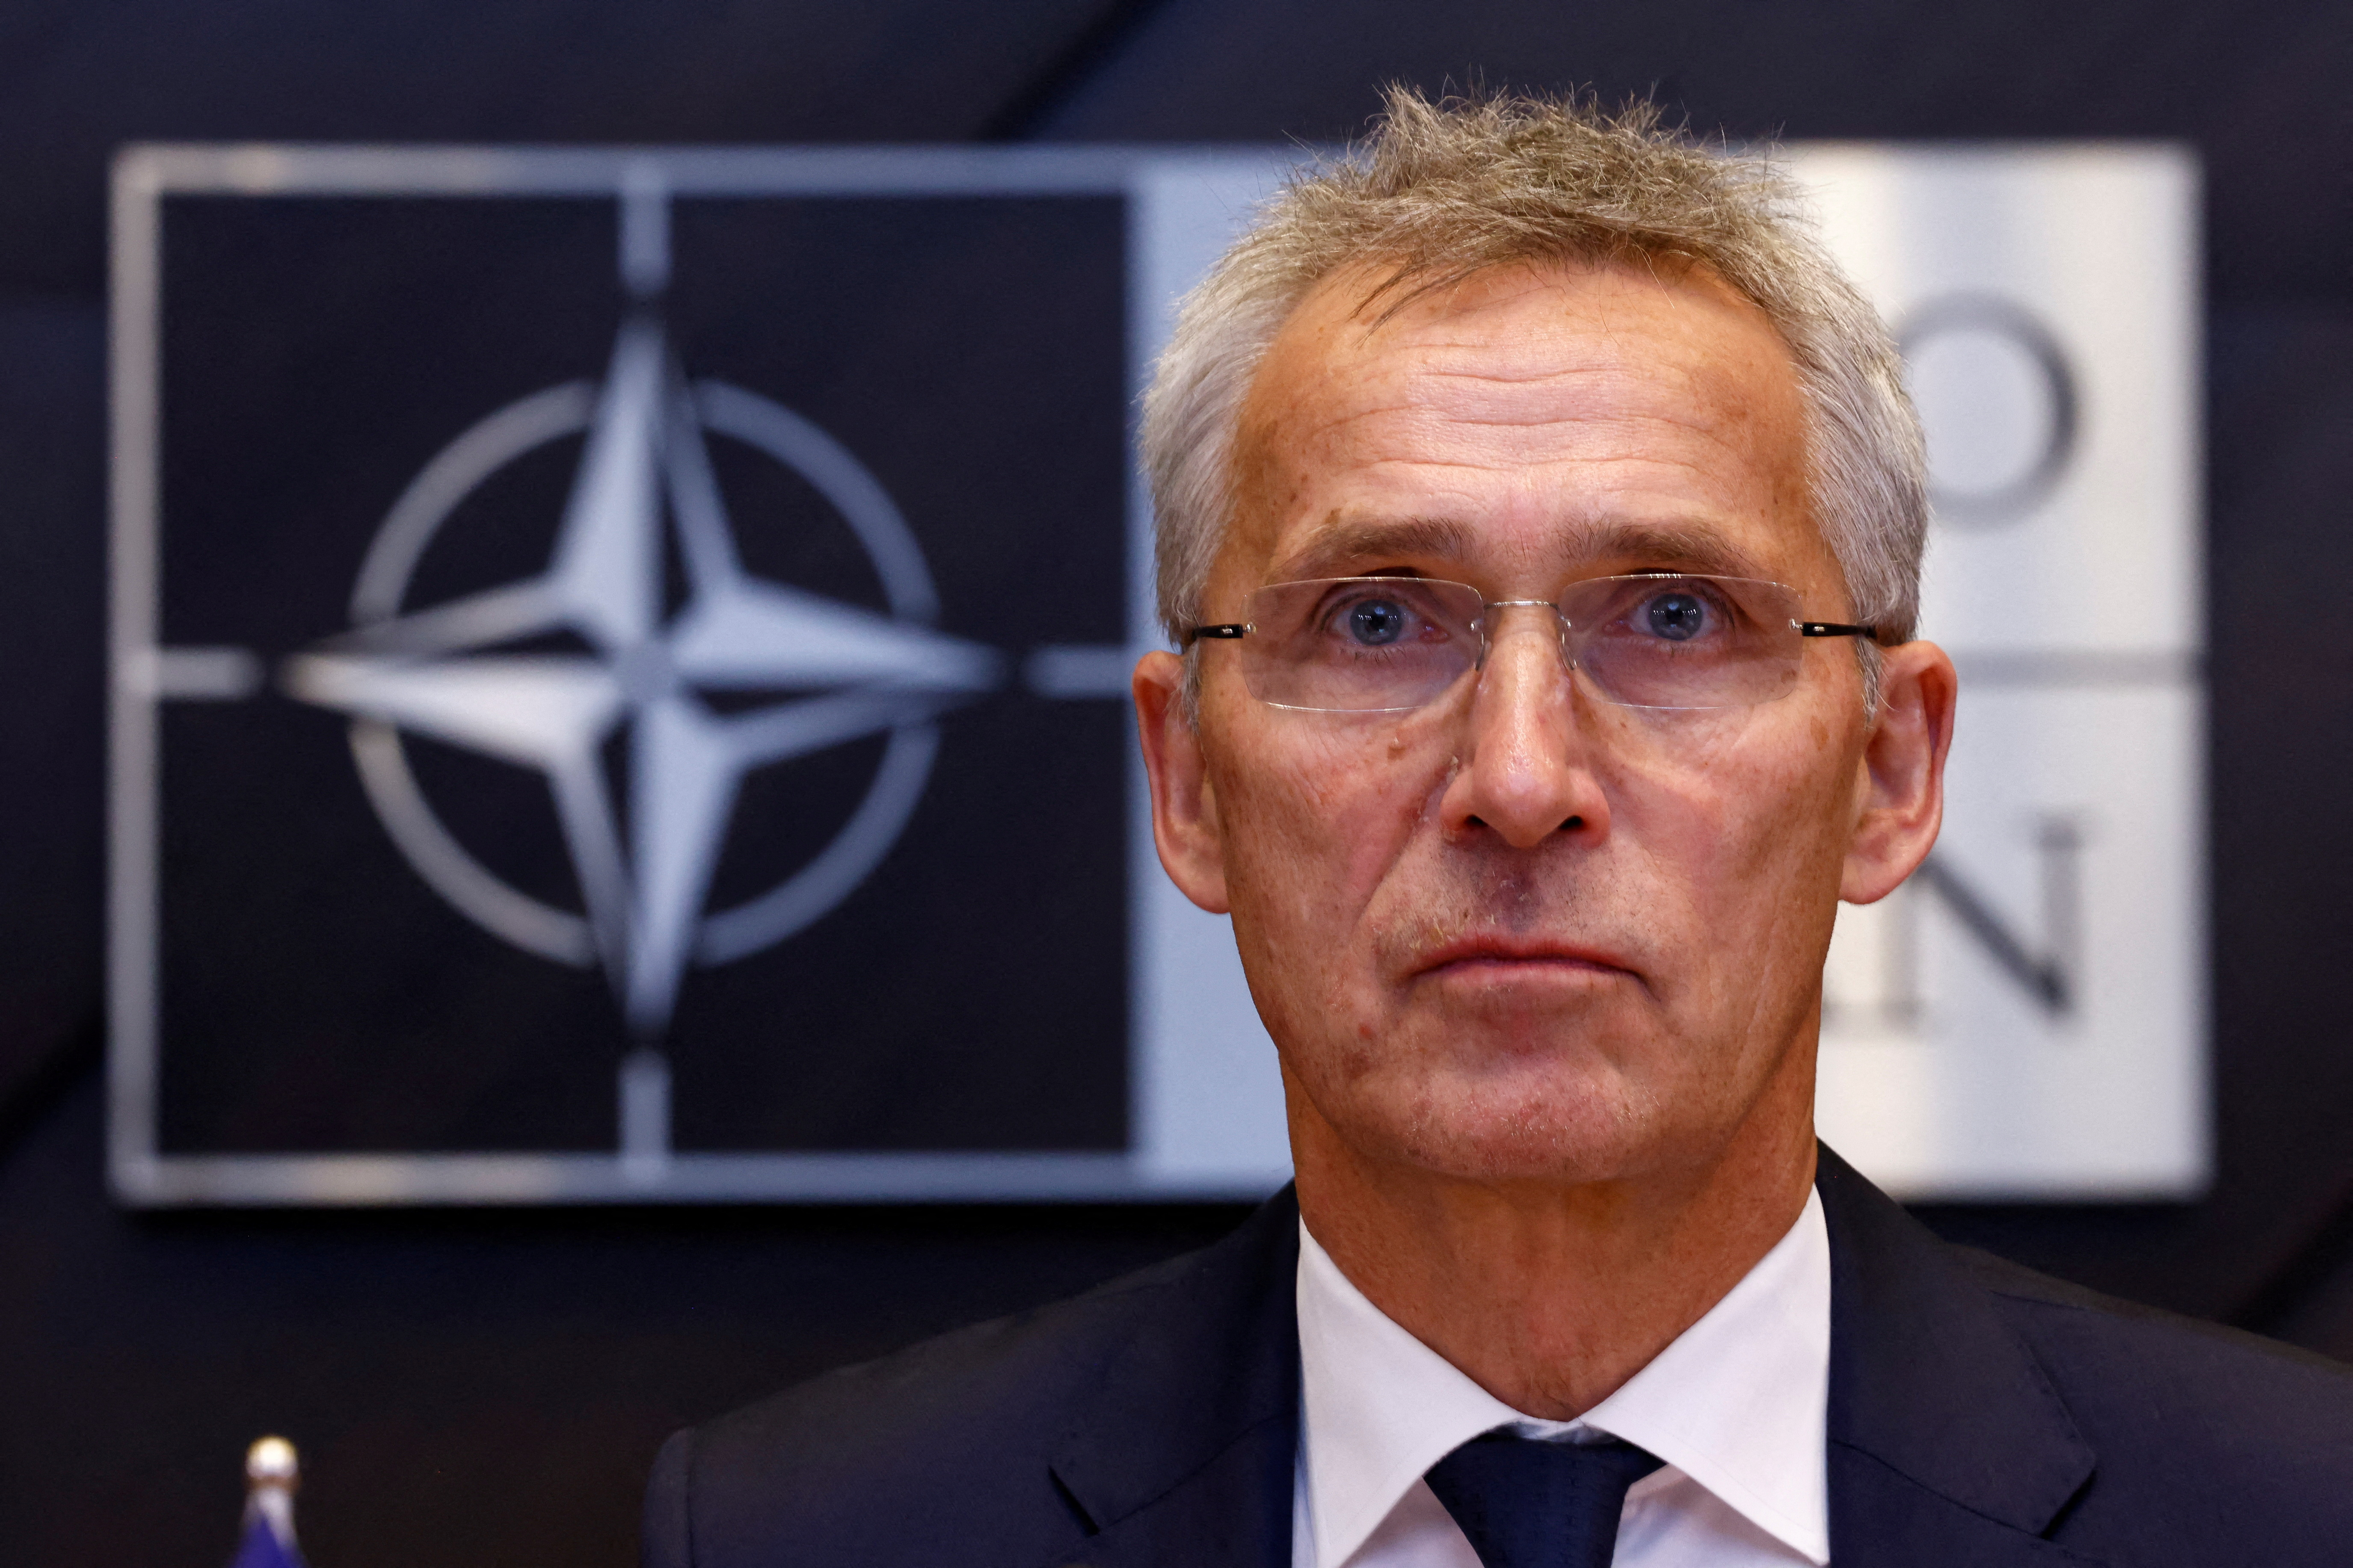 NATO defence ministers meet in Brussels